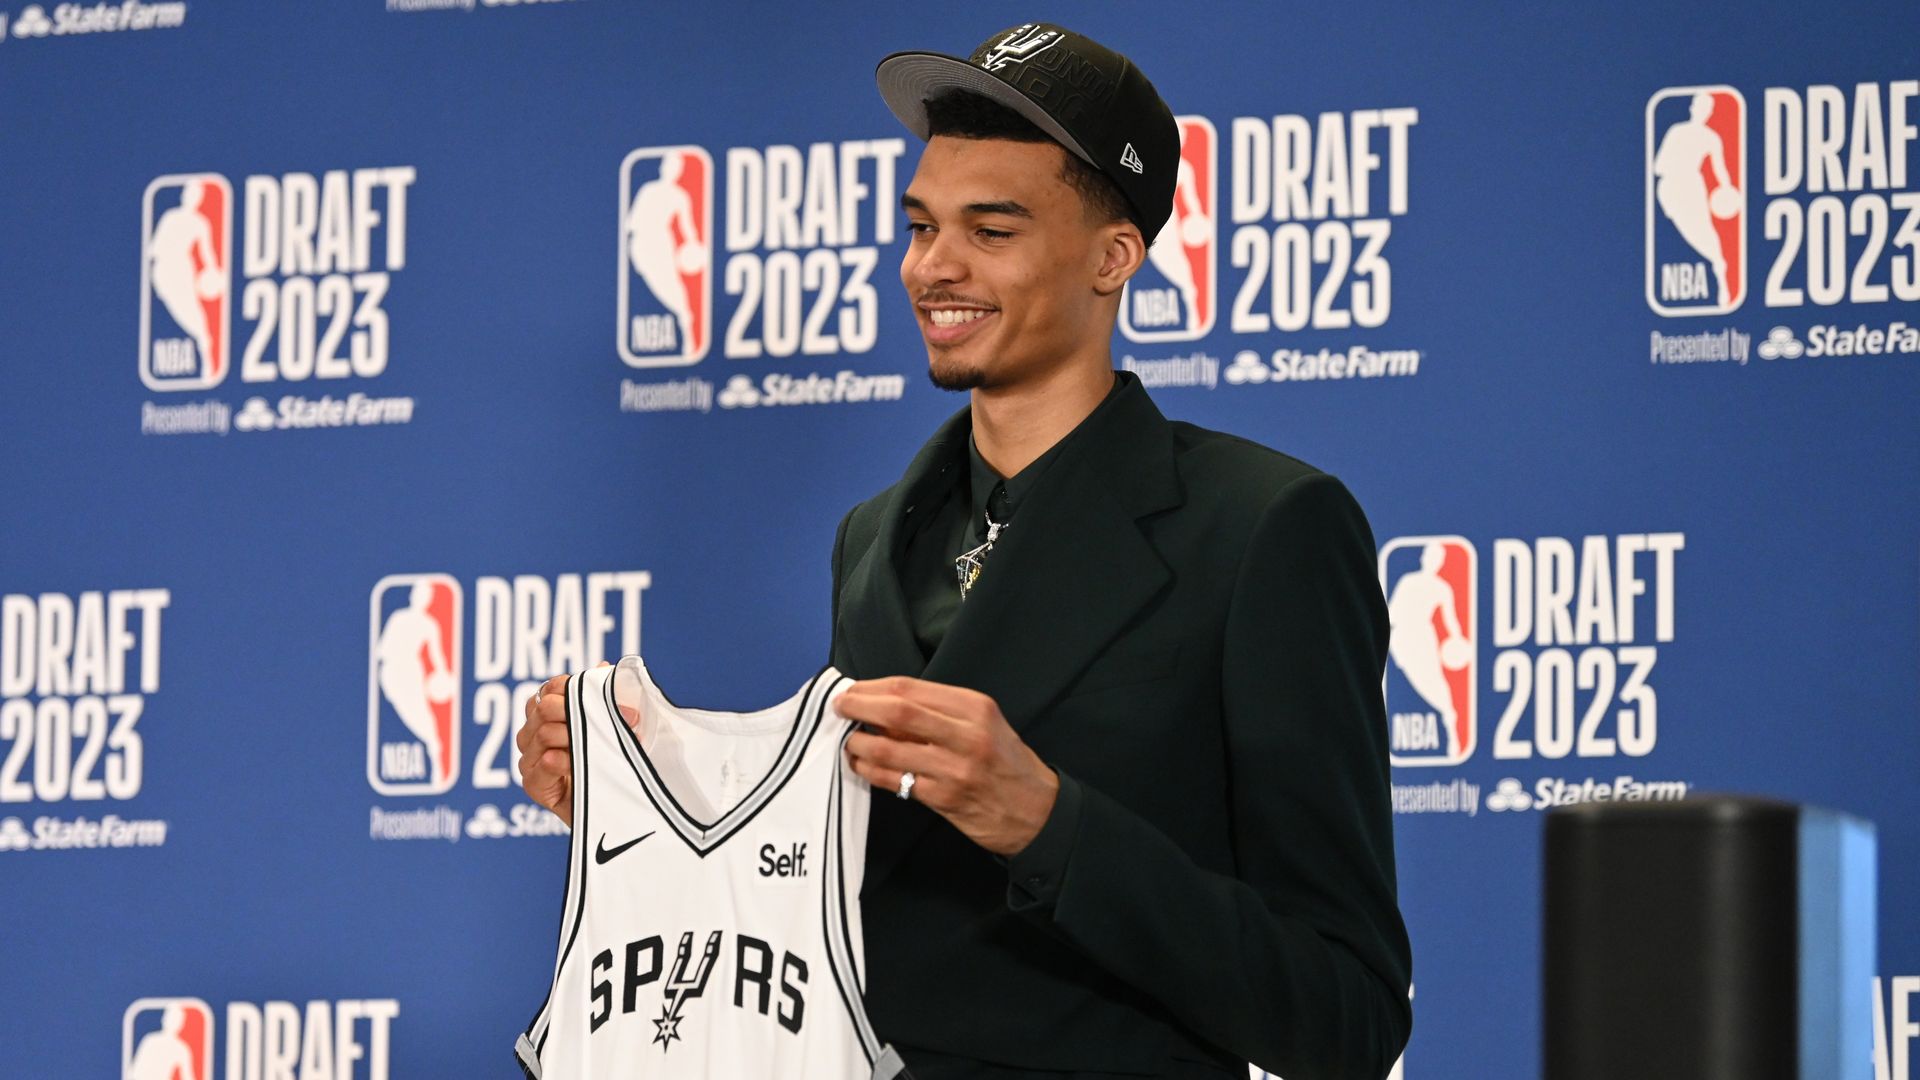 Wemby holds up his No. 1 Spurs jersey in white in front of an NBA Draft 2023 backdrop.